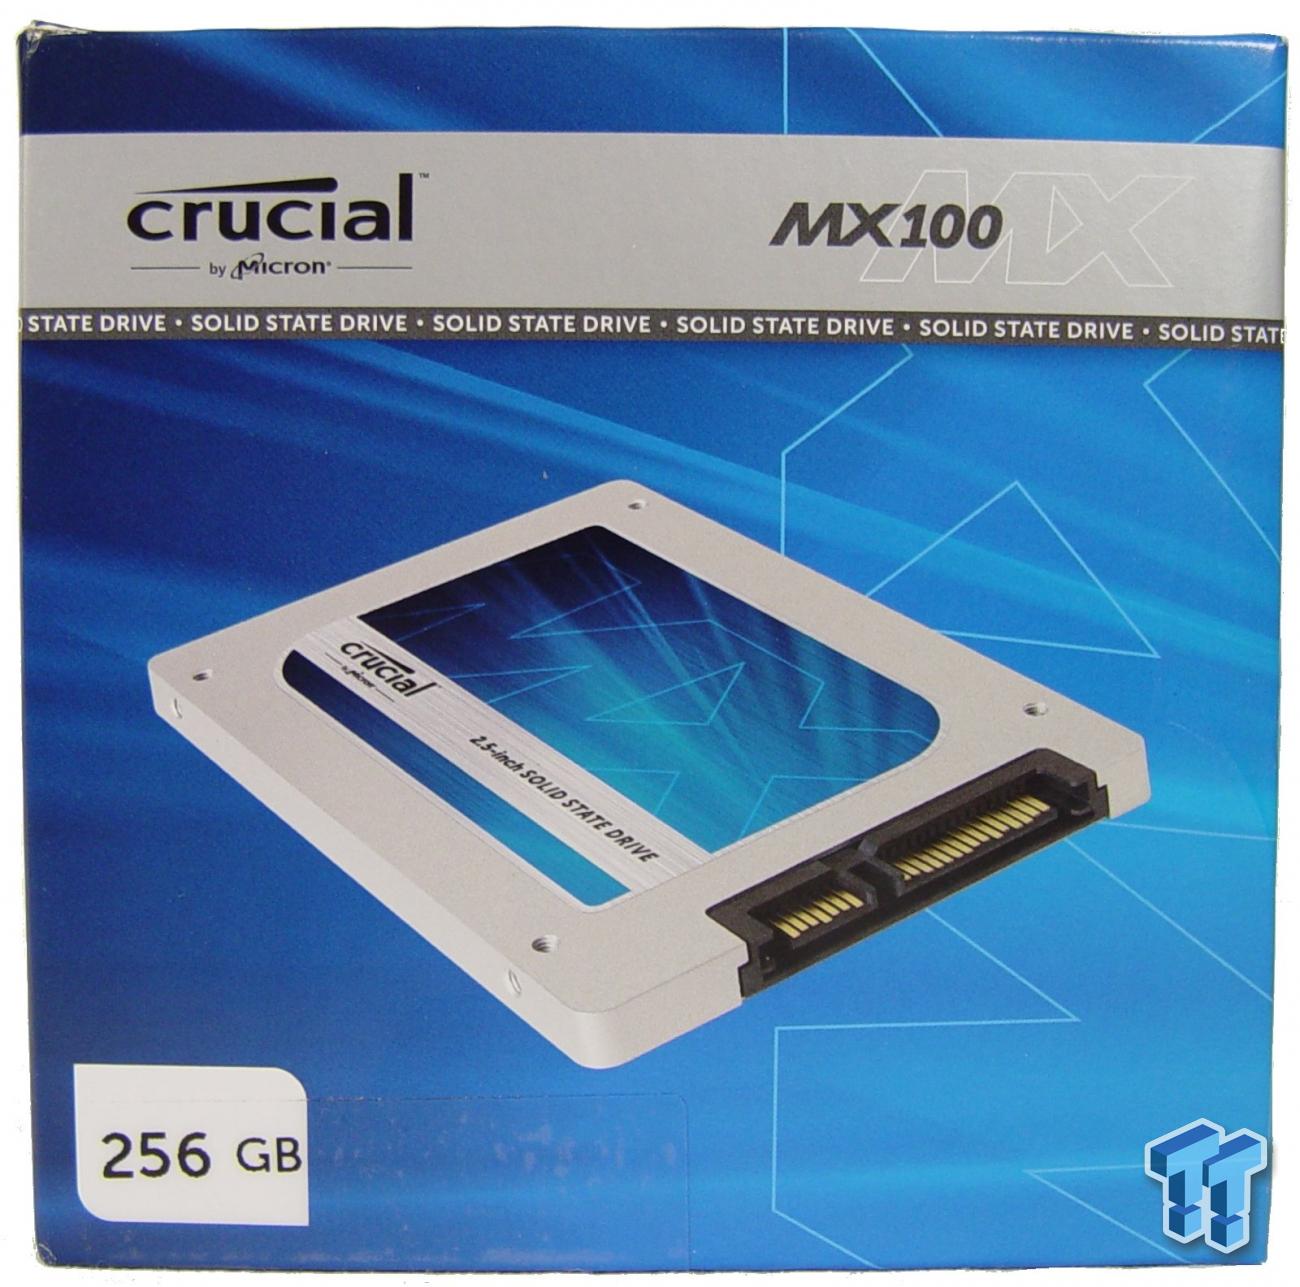 Crucial MX100 256GB SSD Review